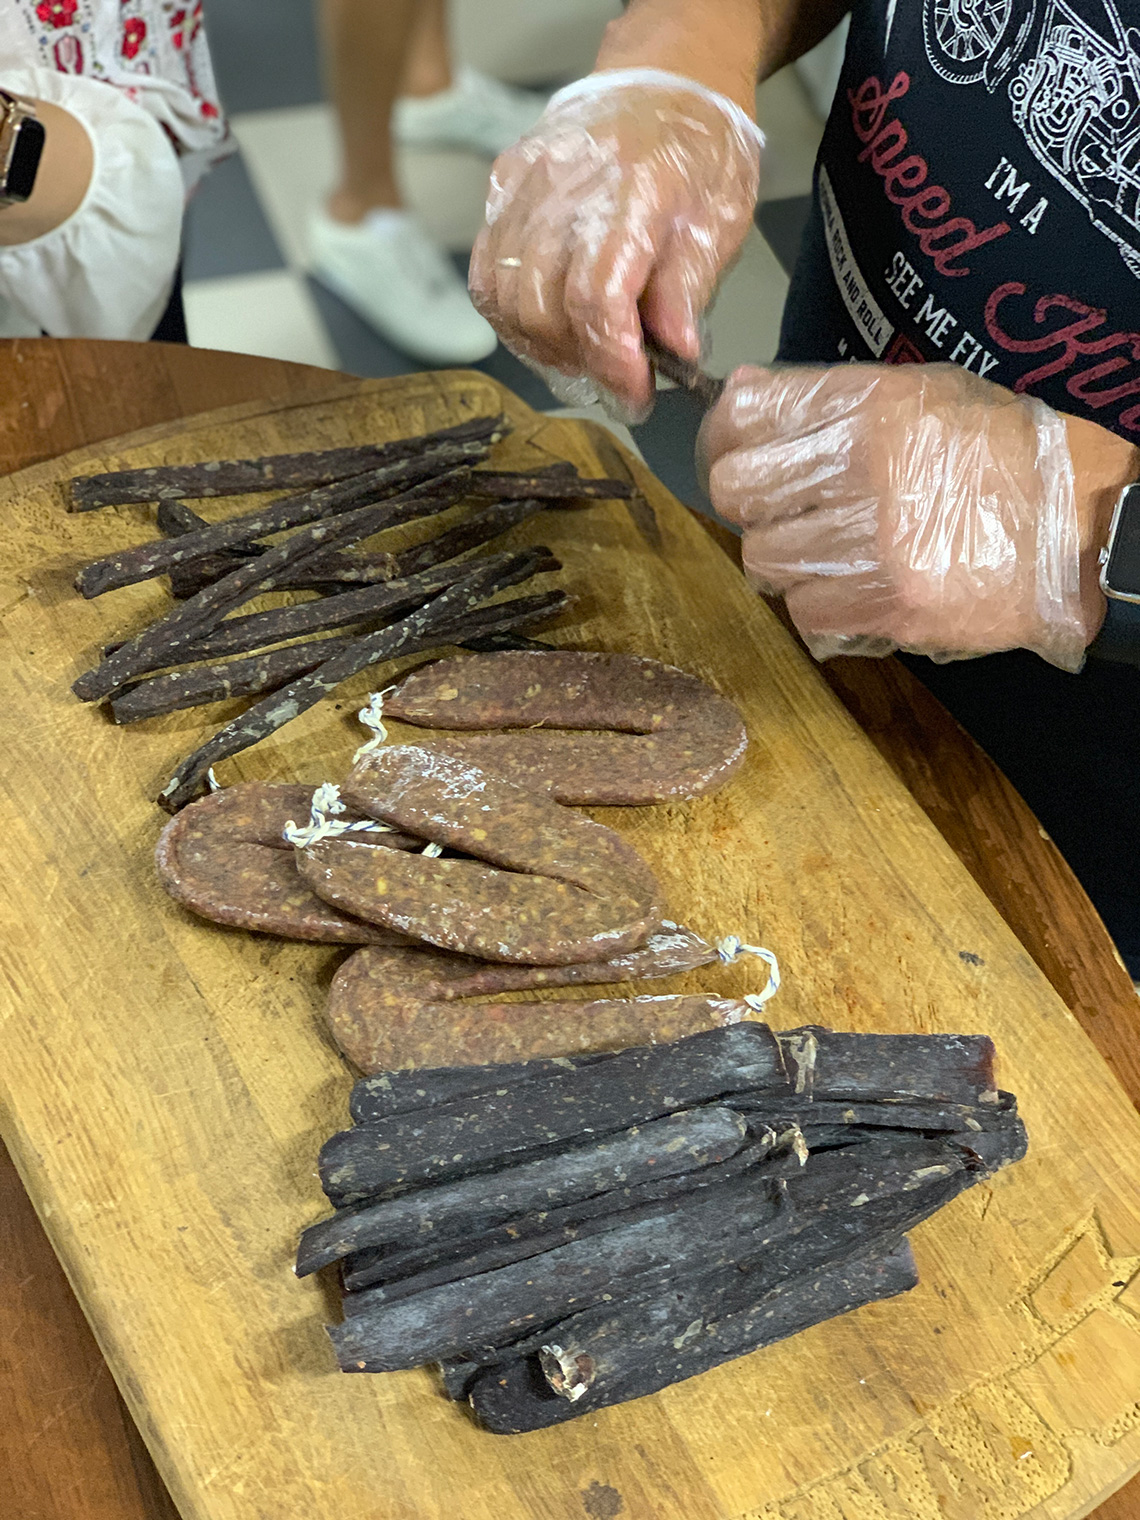 Traditional biltong meat. “Balkans Yastia”. Сooking masterclass for adults in Odessa.